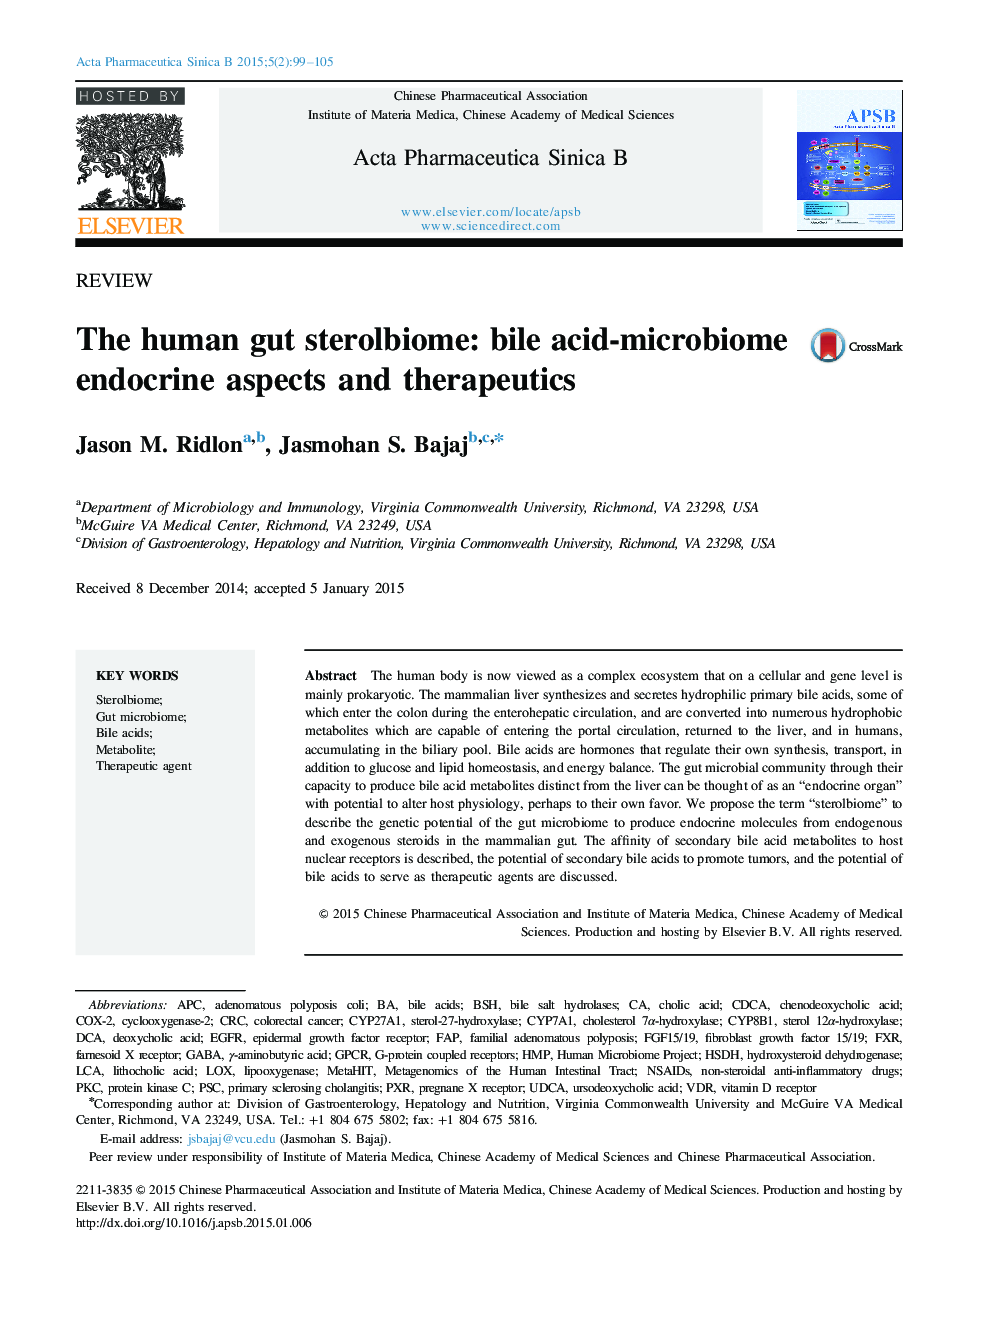 The human gut sterolbiome: bile acid-microbiome endocrine aspects and therapeutics 